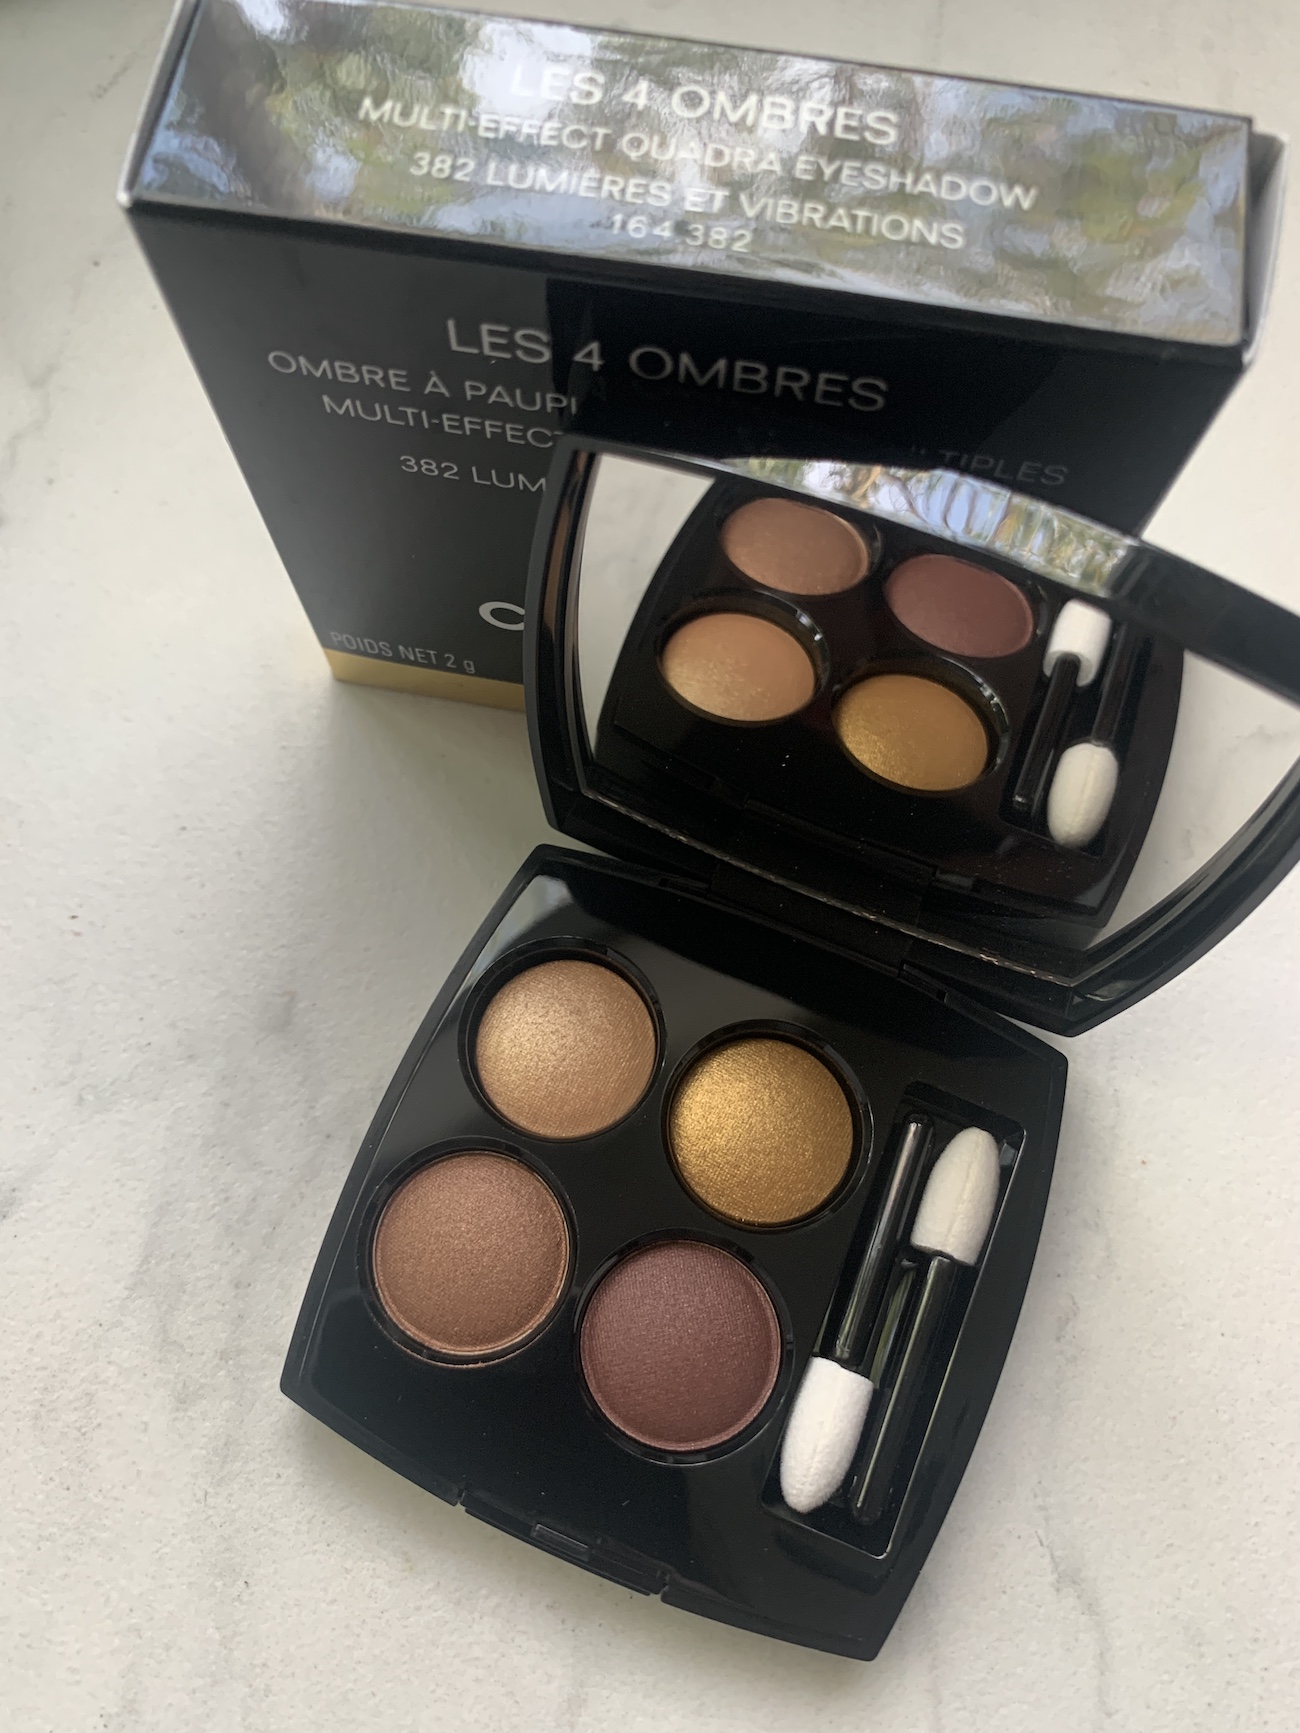 Chanel 382 Lumieres et Vibrations Eyeshadow Review Swatches 